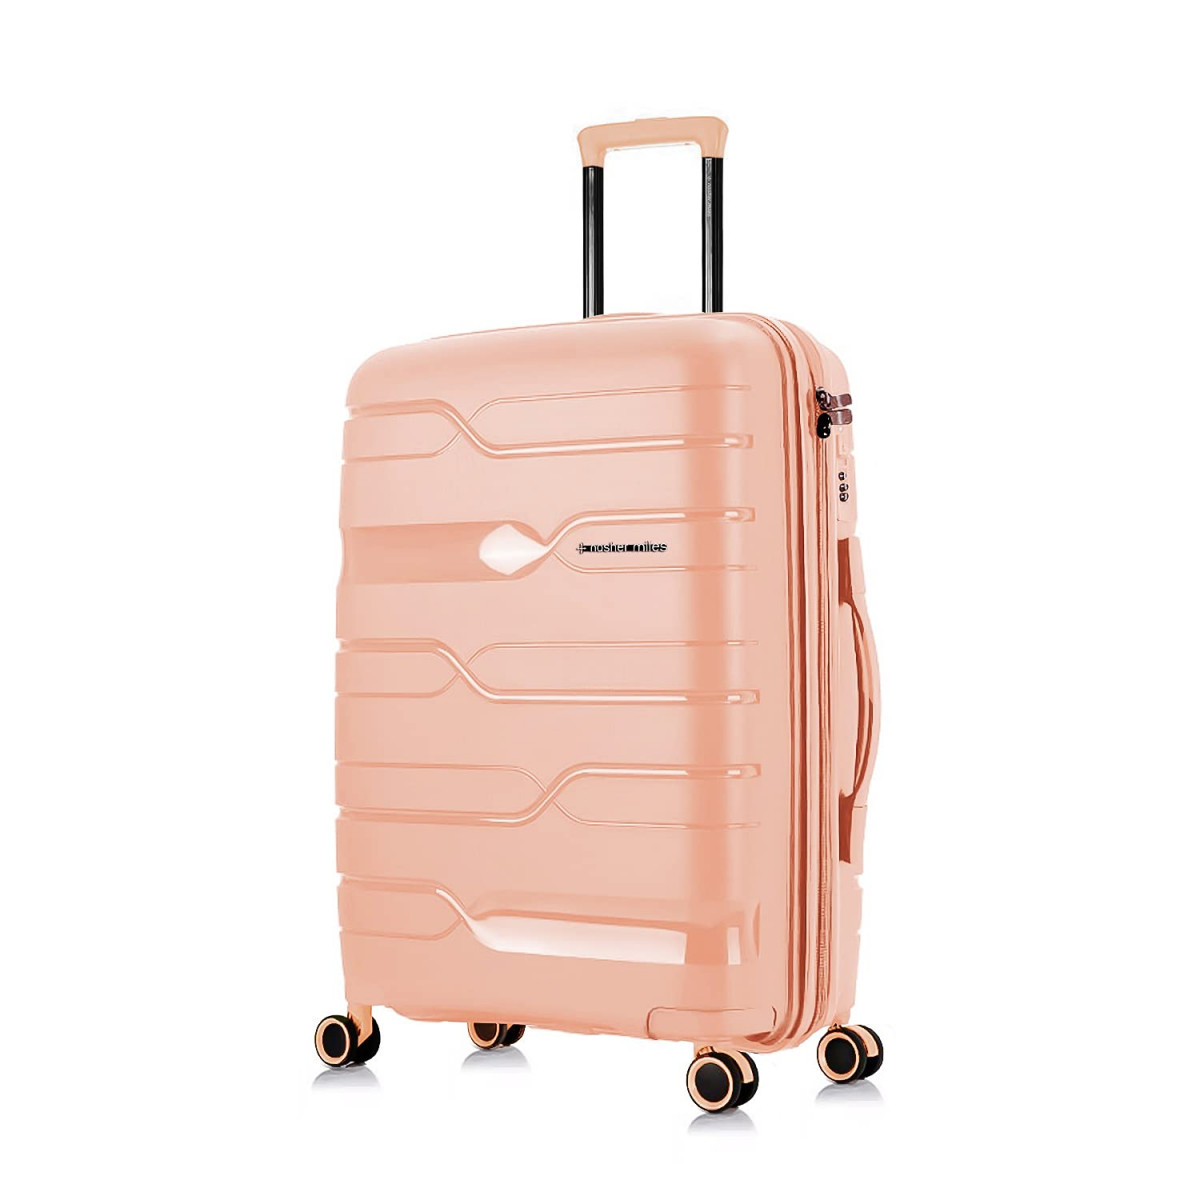 Nasher Miles Paris Hard-Sided Polypropylene Check-in Luggage Peach 28 inch 75cm Trolley Bag